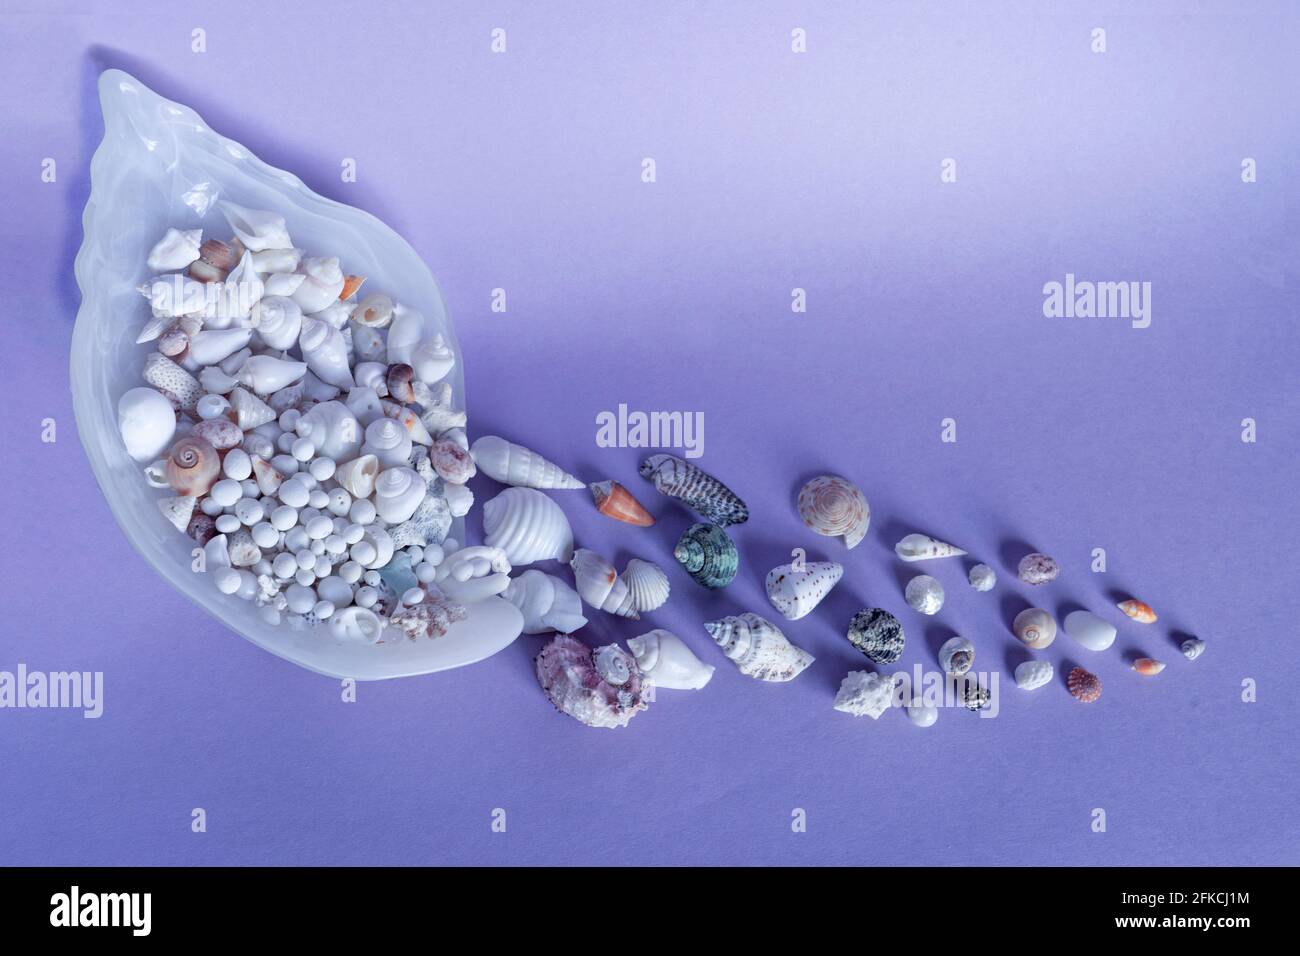 Some colorful sea shells dropping from giant see shell, lilac background. Stock Photo